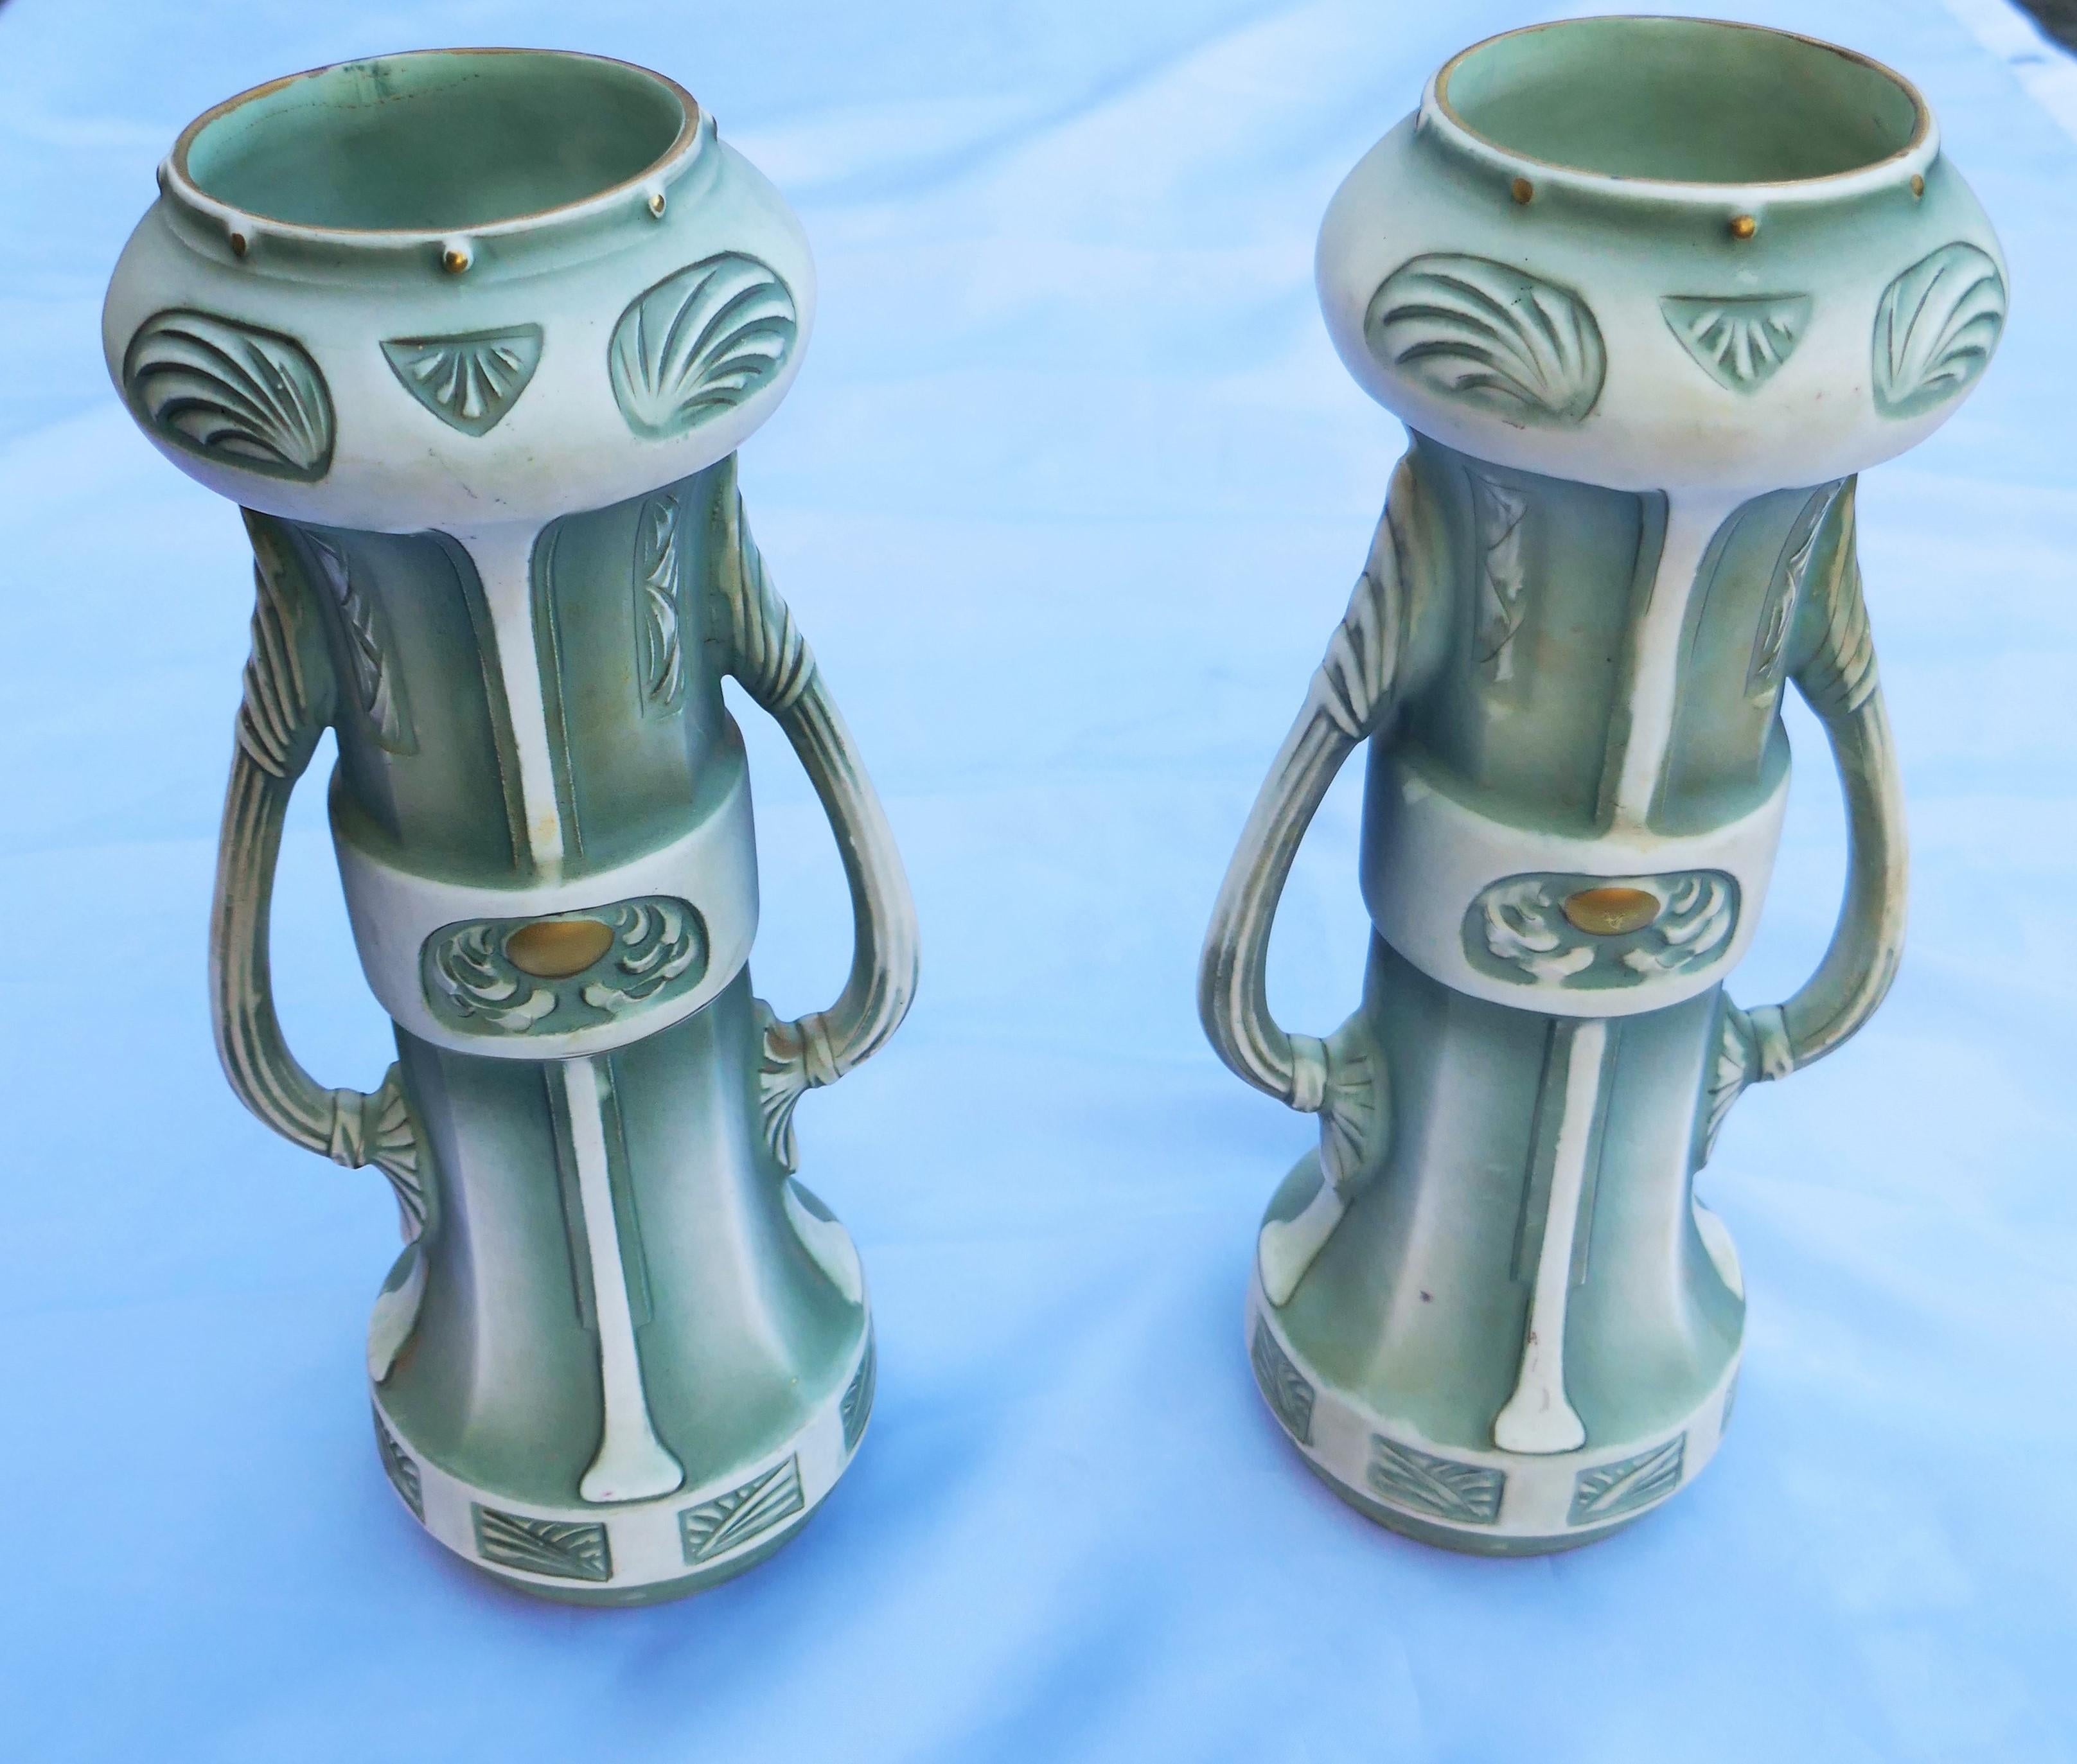 Pair of vases attributed to Robert Hanke for Royal Wettina Austria.
Good conditions.
Thank you.